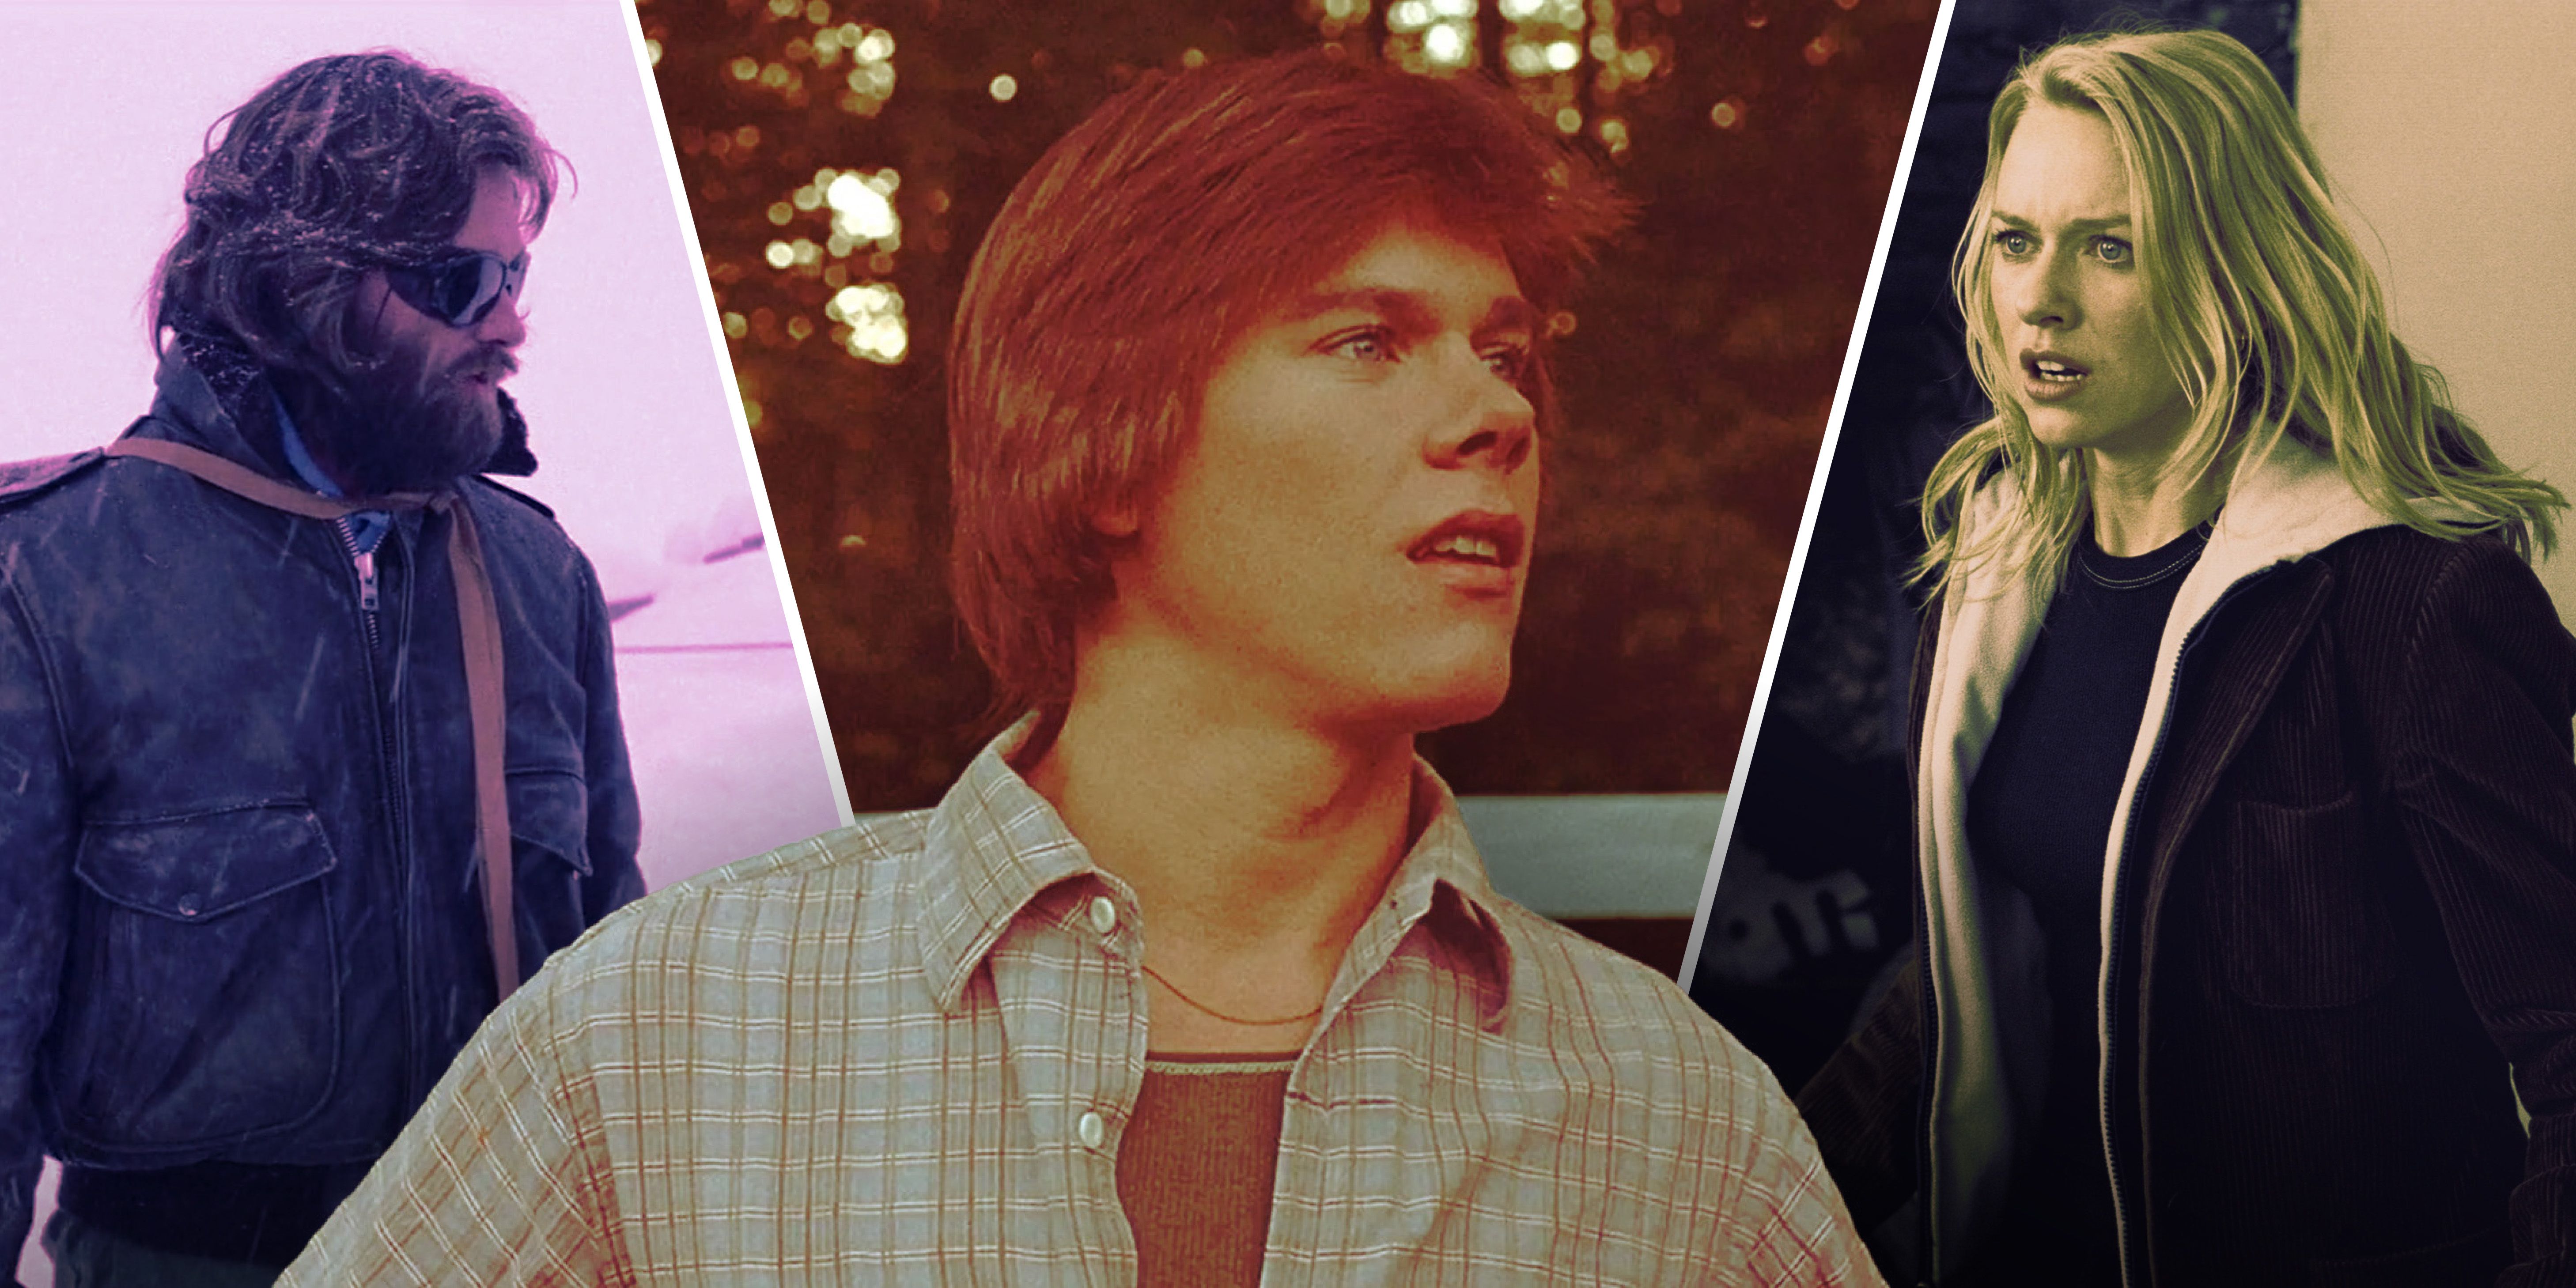 Kurt Russell from The Thing, Kevin Bacon from Friday the 13th, and Naomi Watts from The Ring